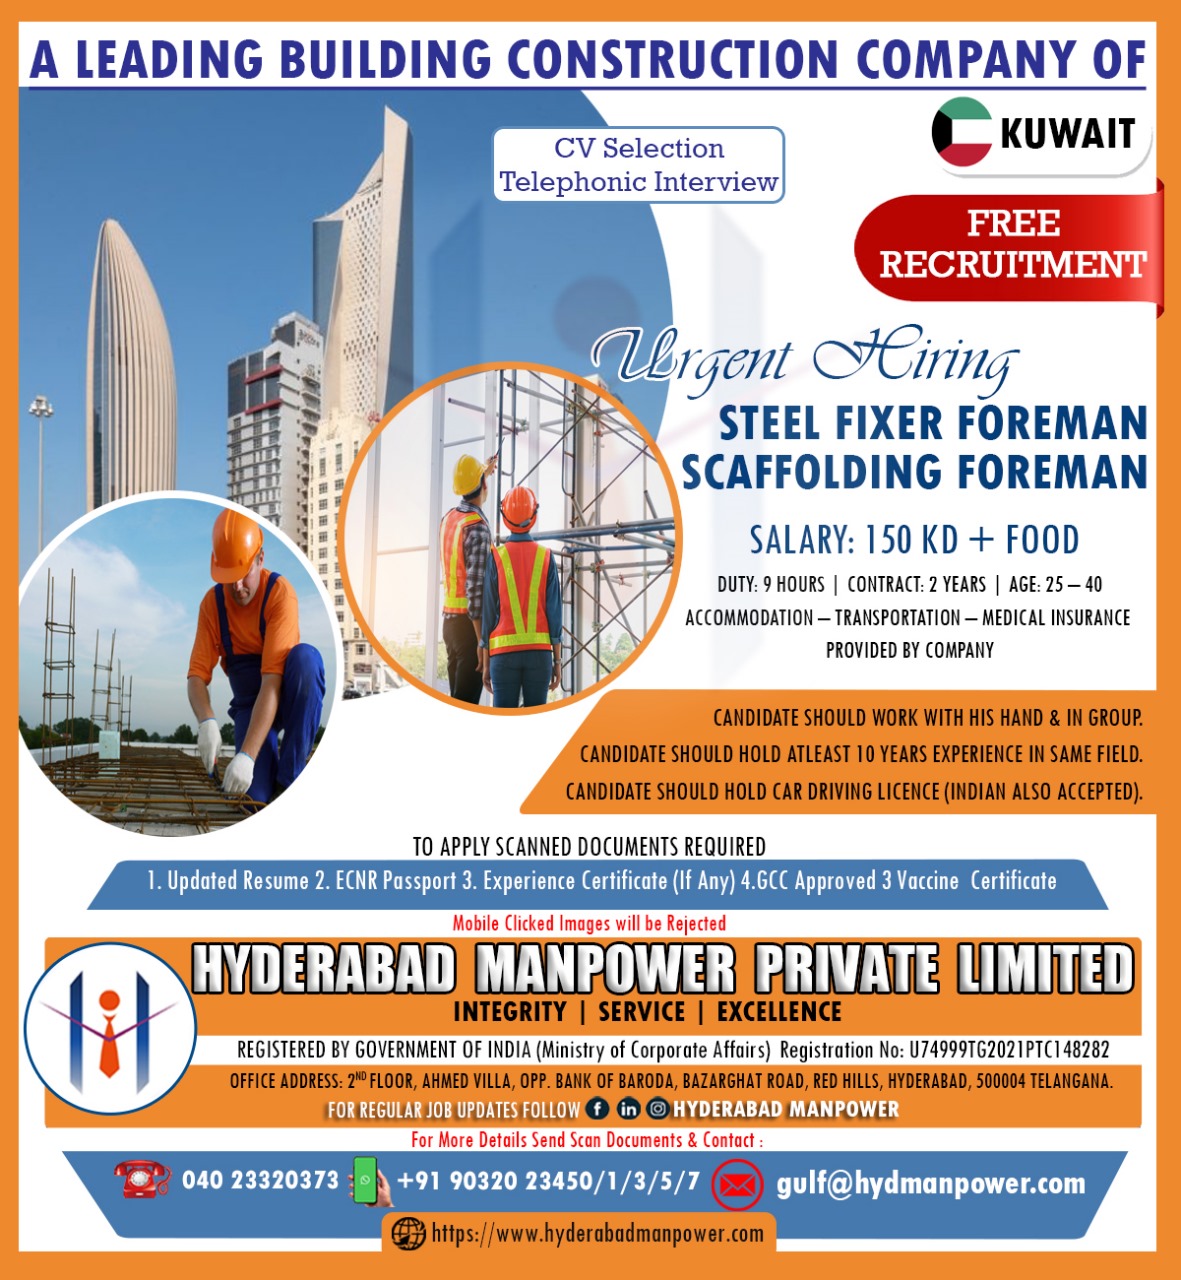 Urgent Hiring For A Leading Building Construction Company Of Kuwait